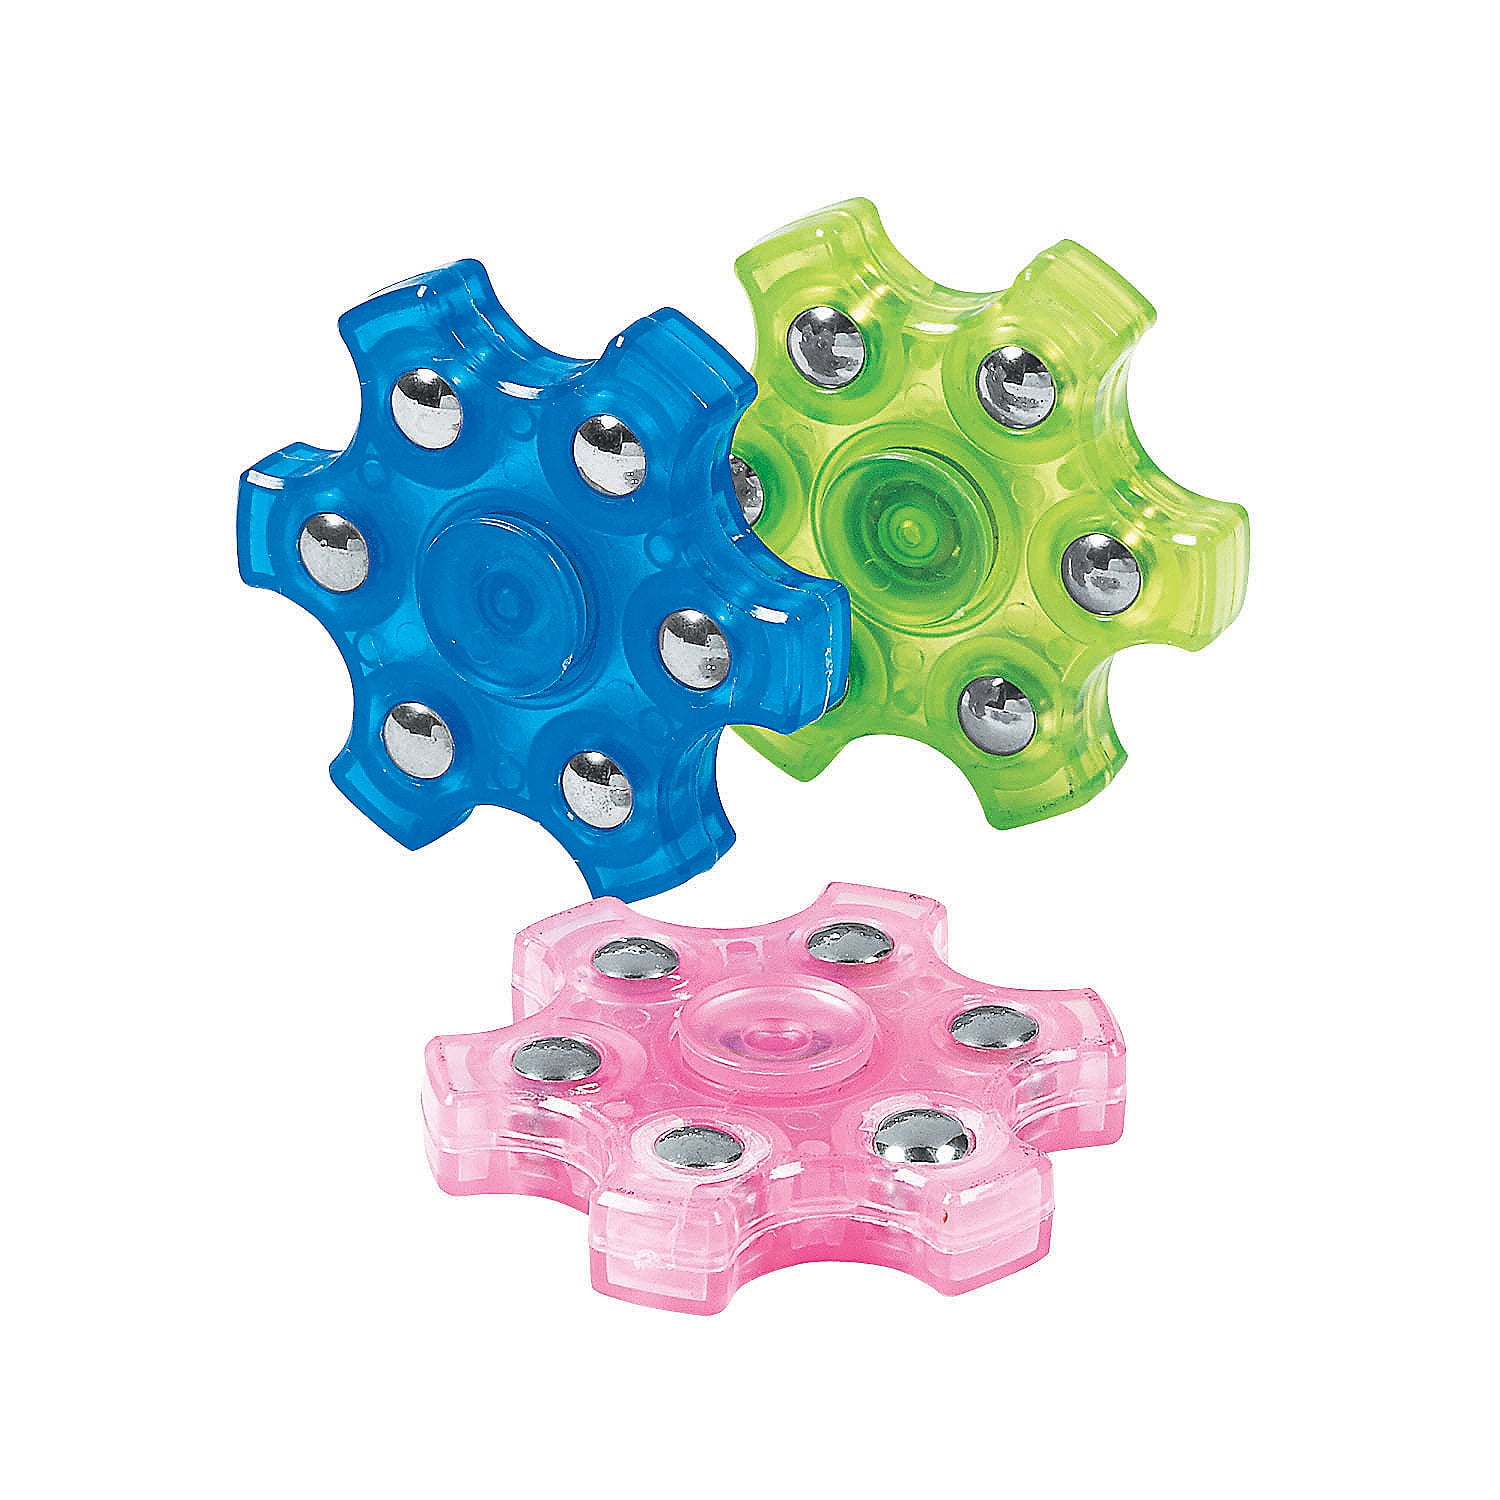 Finger Fidget Spinners 6 pieces Assorted Stress Relief Toy ~Brand New~ 